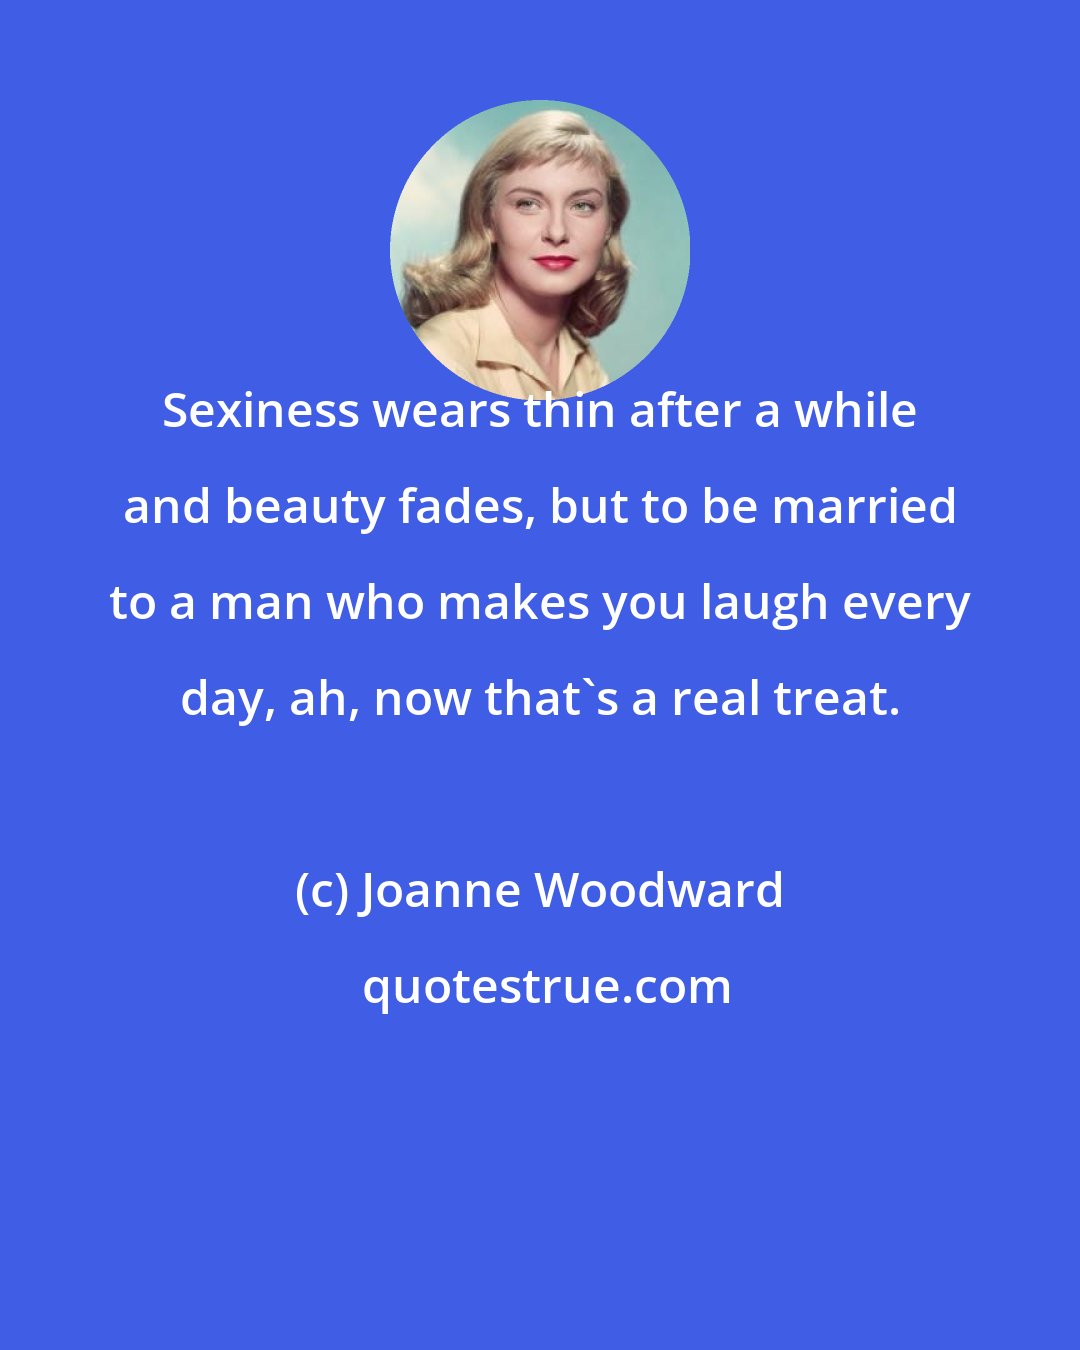 Joanne Woodward: Sexiness wears thin after a while and beauty fades, but to be married to a man who makes you laugh every day, ah, now that's a real treat.